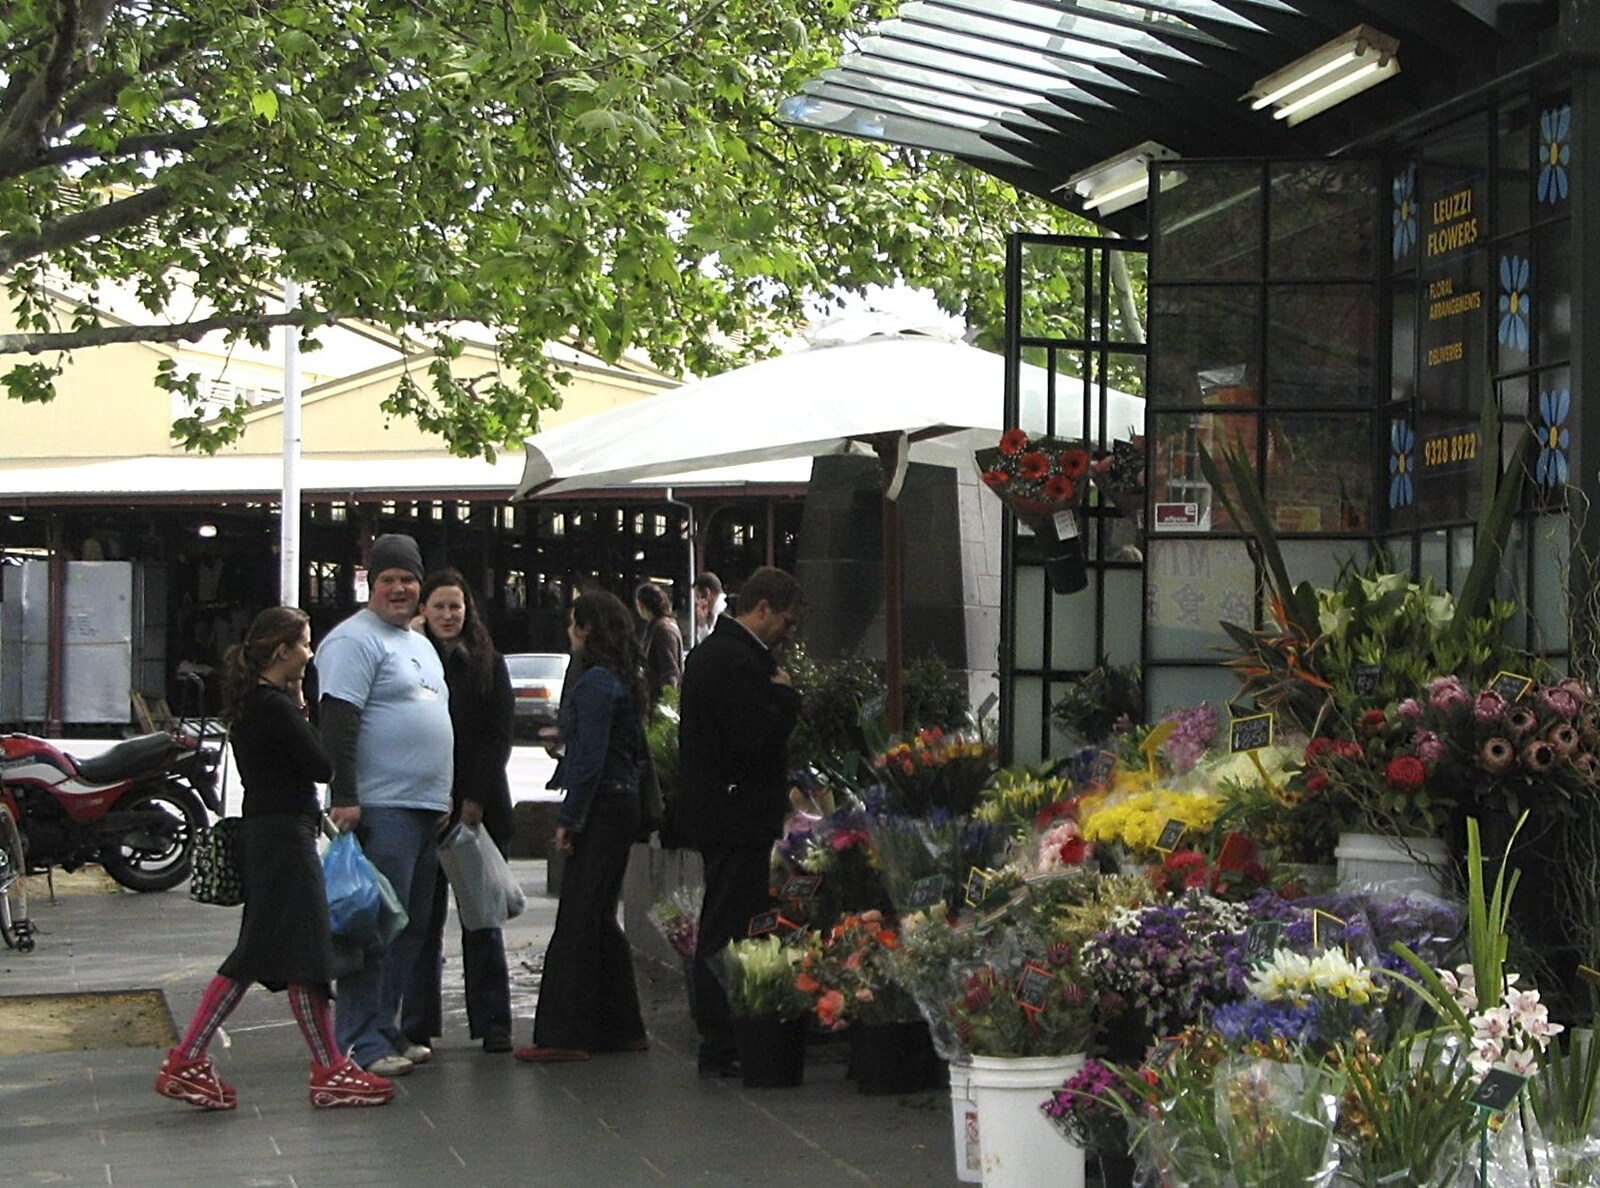 Platform shoes outside the market from A Couple of Days in Melbourne, Victoria, Australia - 5th October 2004